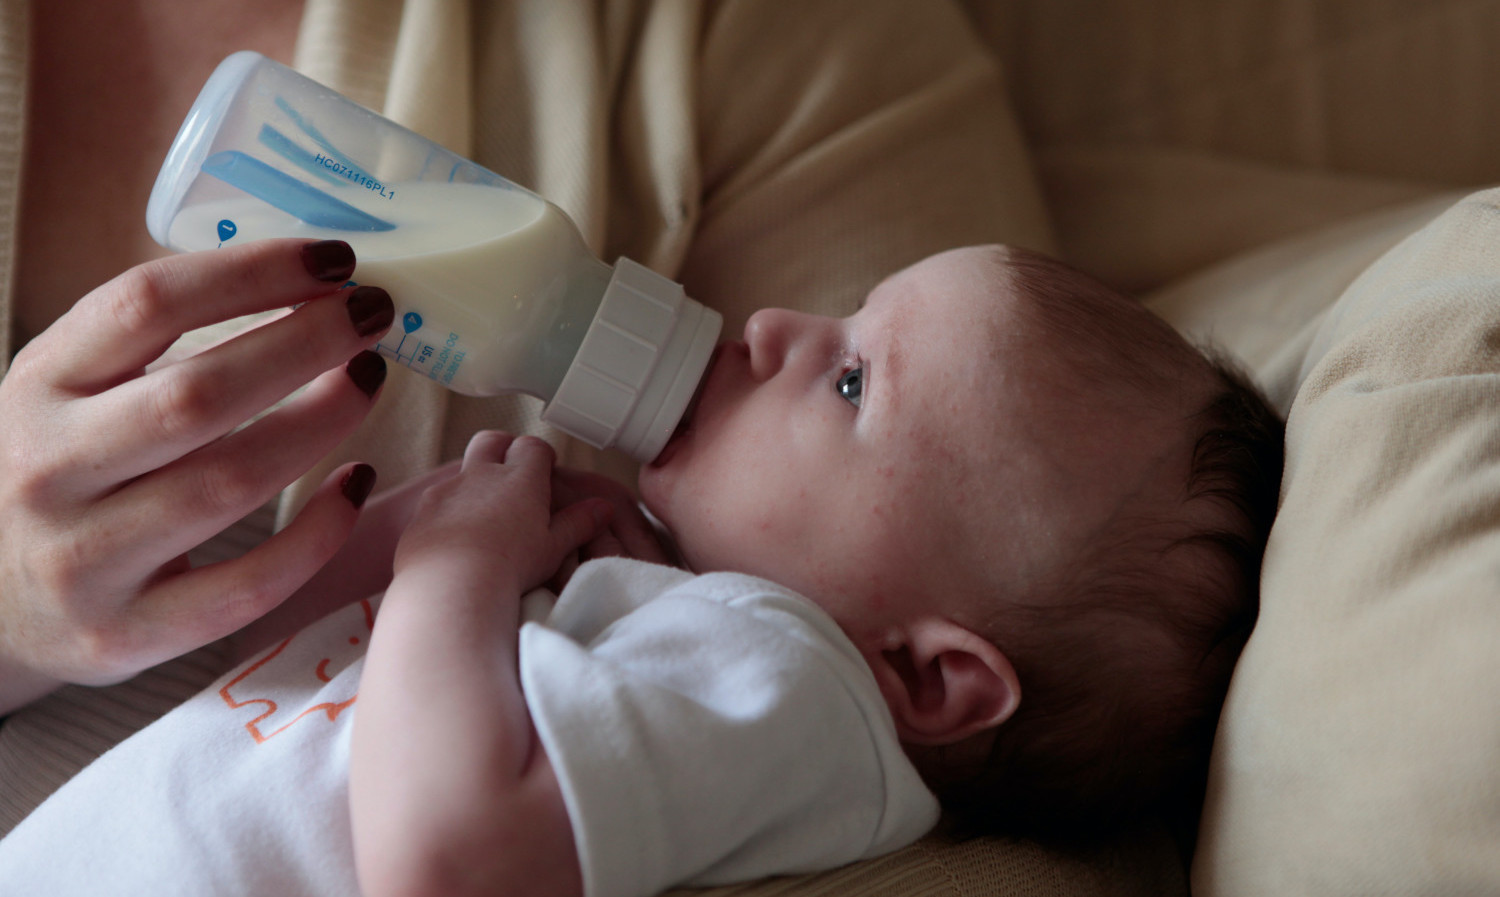 The U.S. Infant Formula Crisis Highlights the Dangers of Food Monopolies